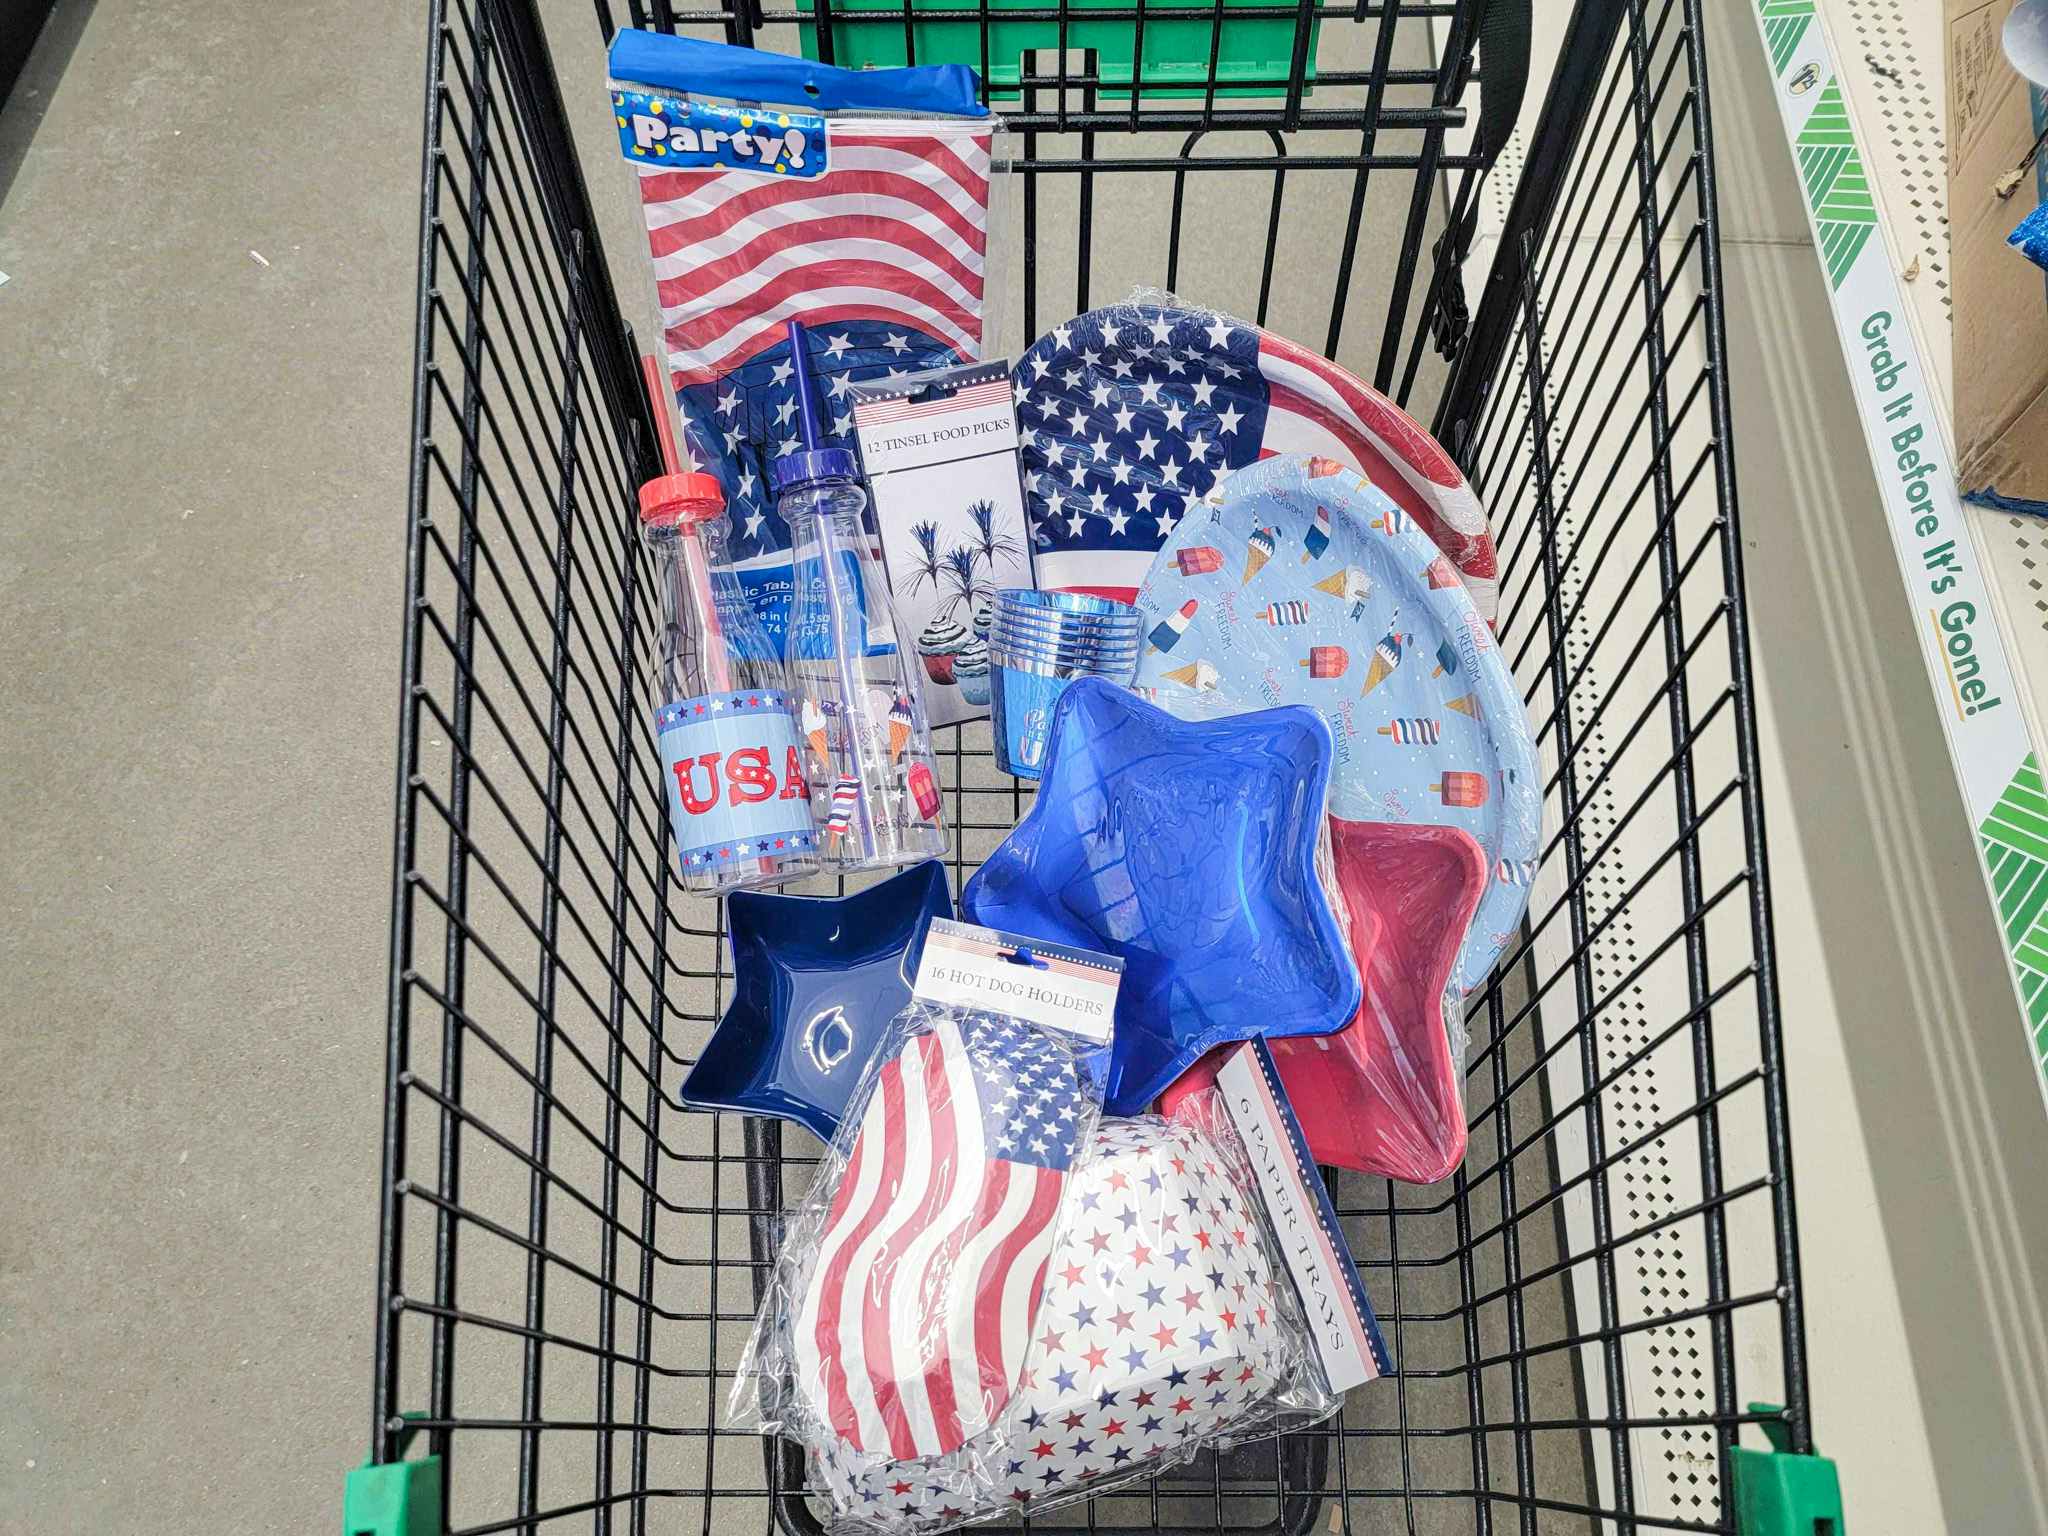 patriotic party supplies in a cart